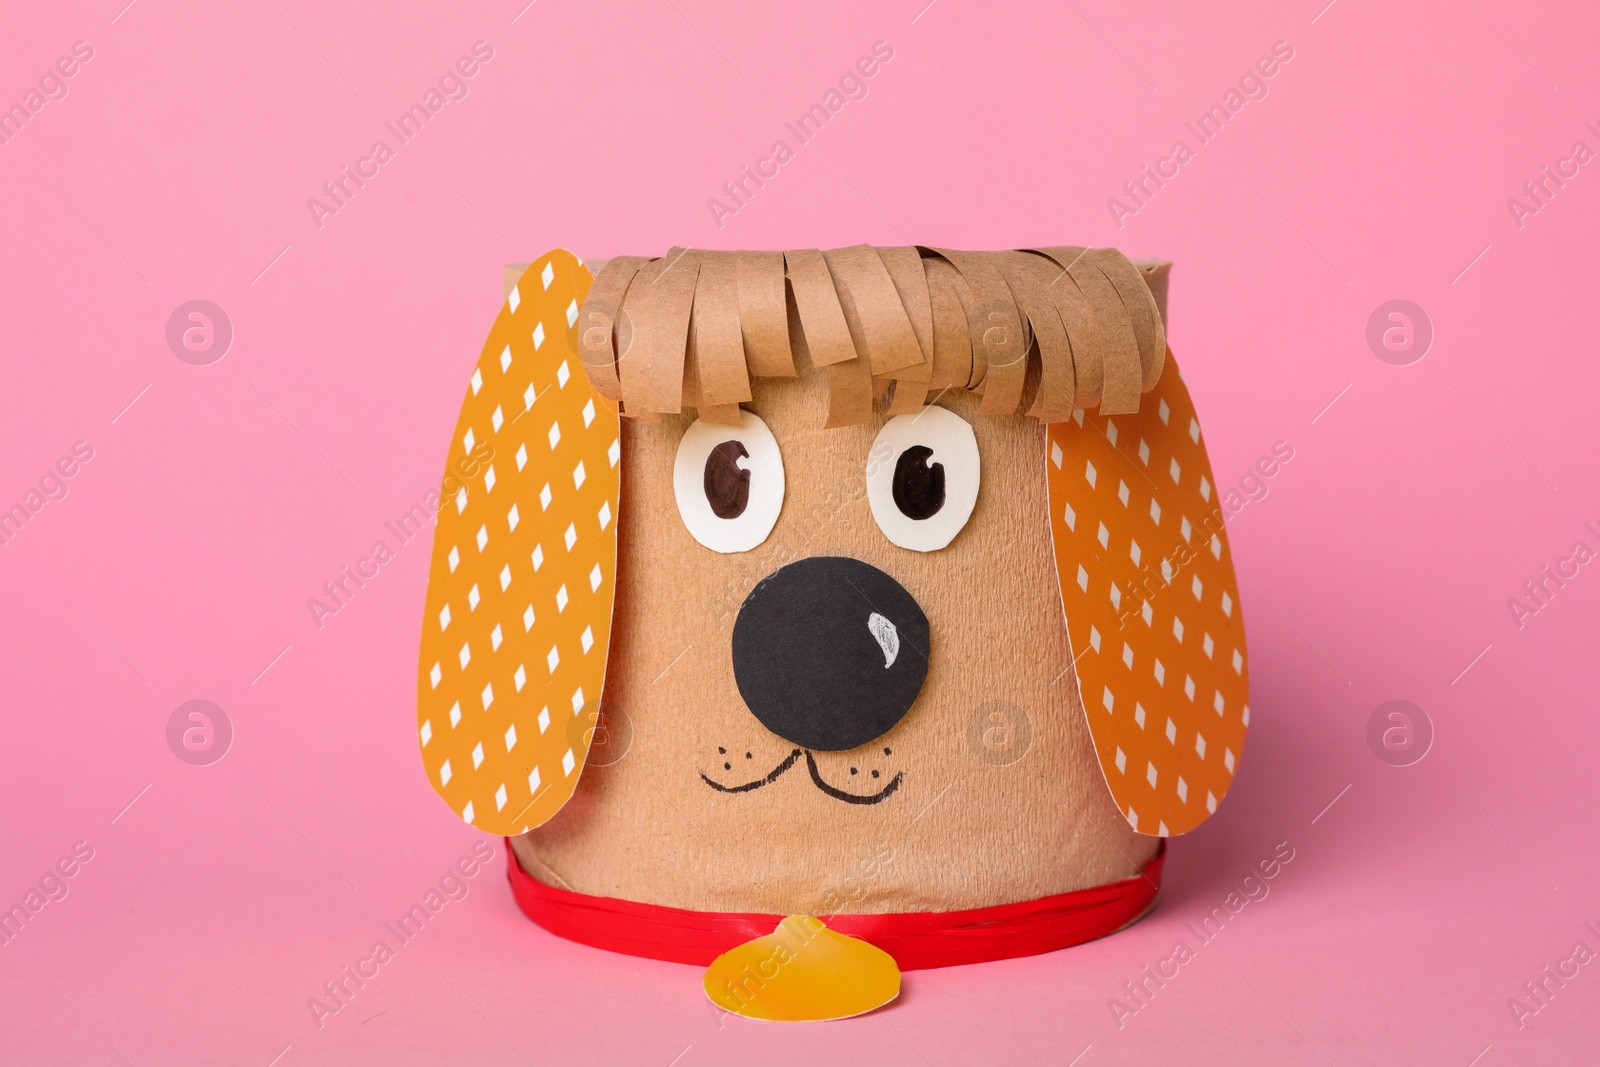 Photo of Toy dog made of toilet paper roll on pink background